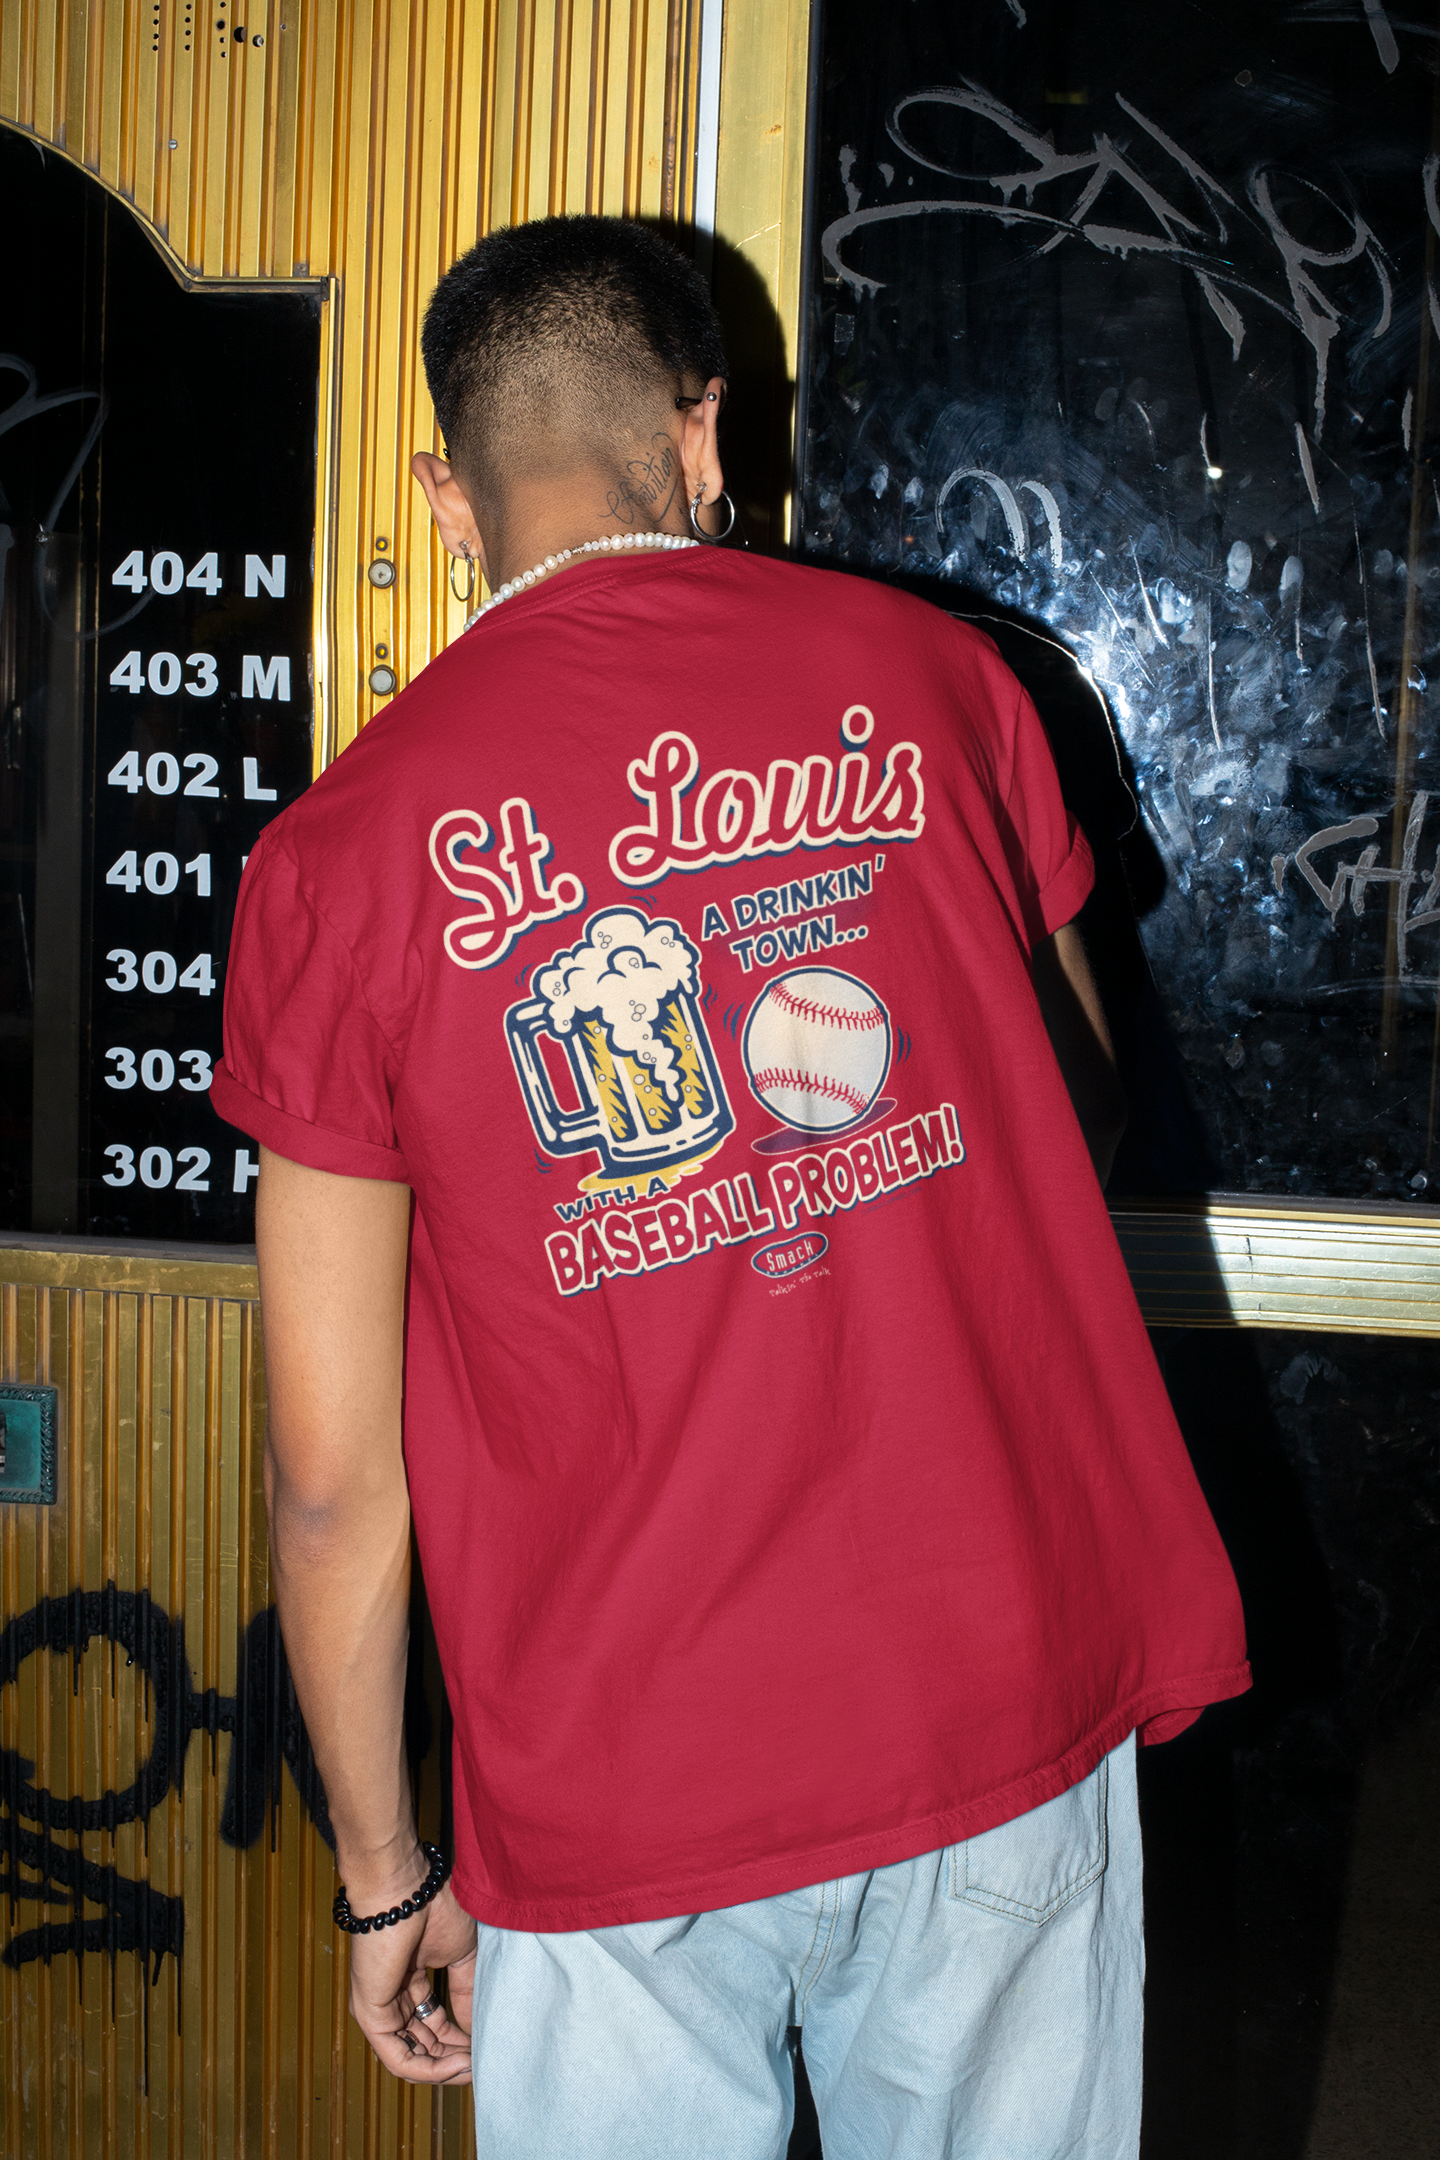 No Place Like Home T-Shirt for St. Louis Baseball Fans – Smack Apparel